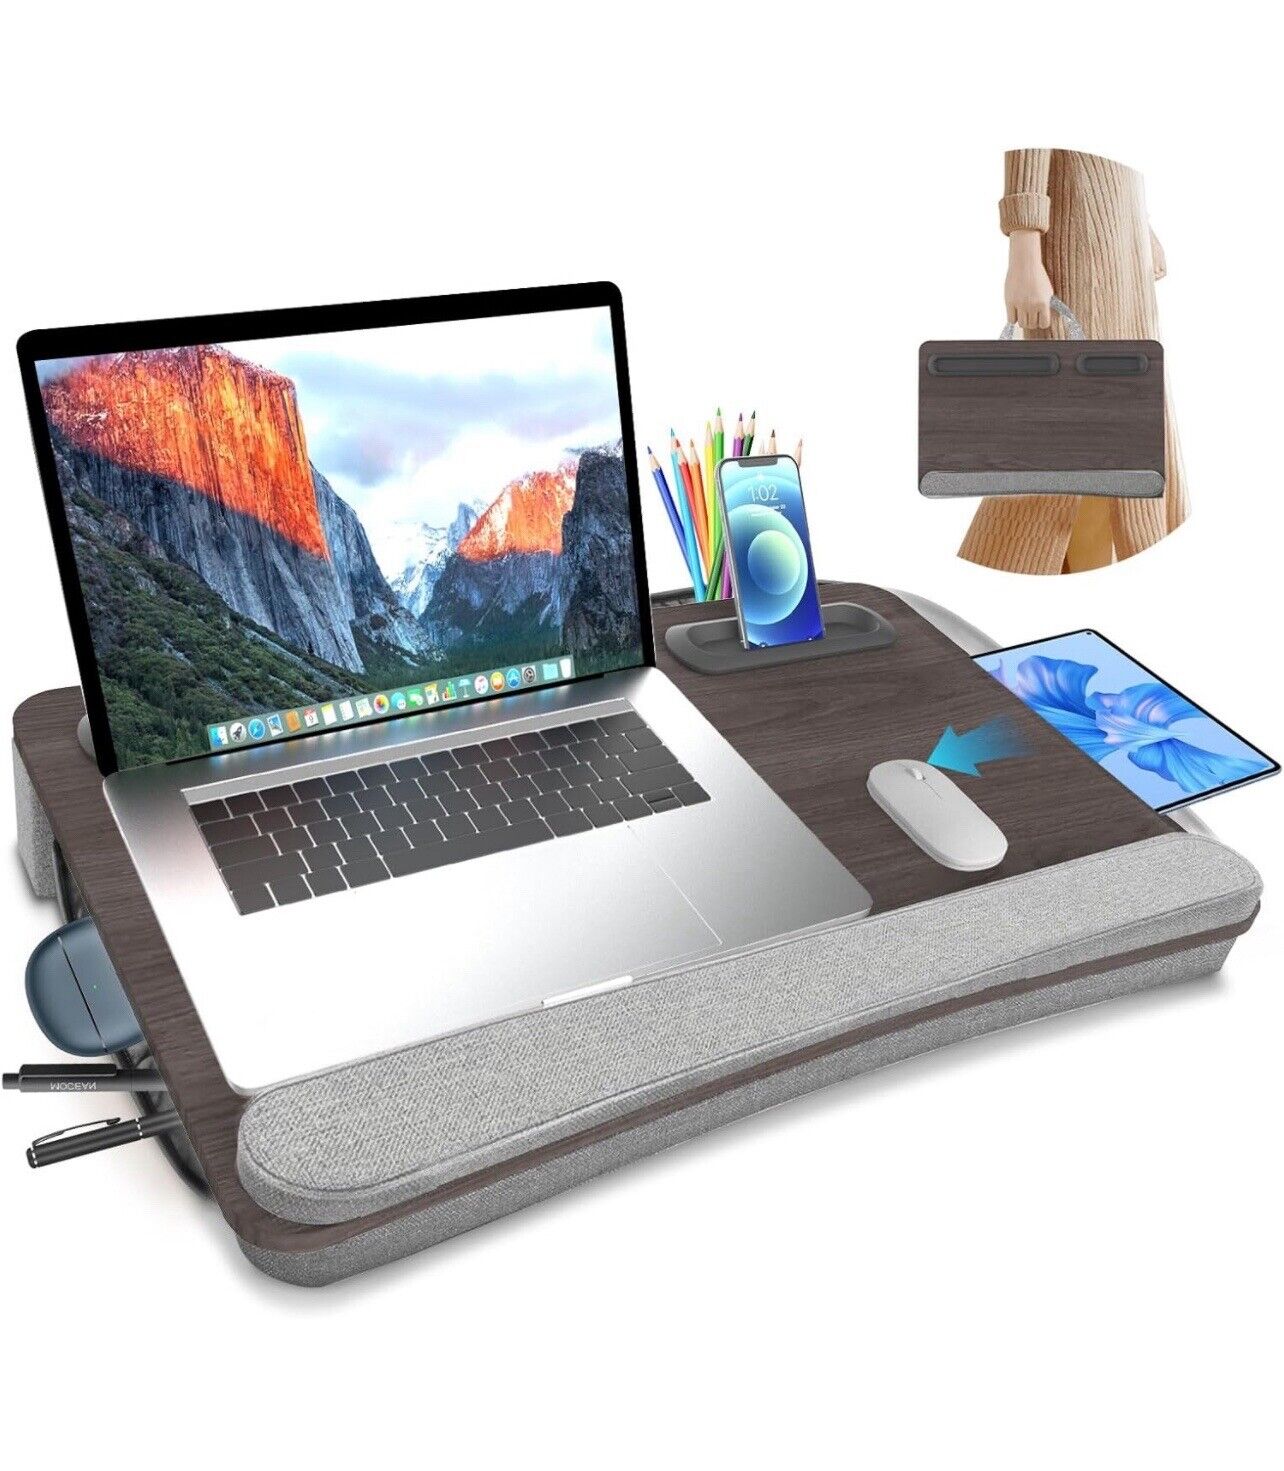 HUANUO Lap Desk - Fits up to 17 inches Laptop Desk with Tablet & Phone Holder